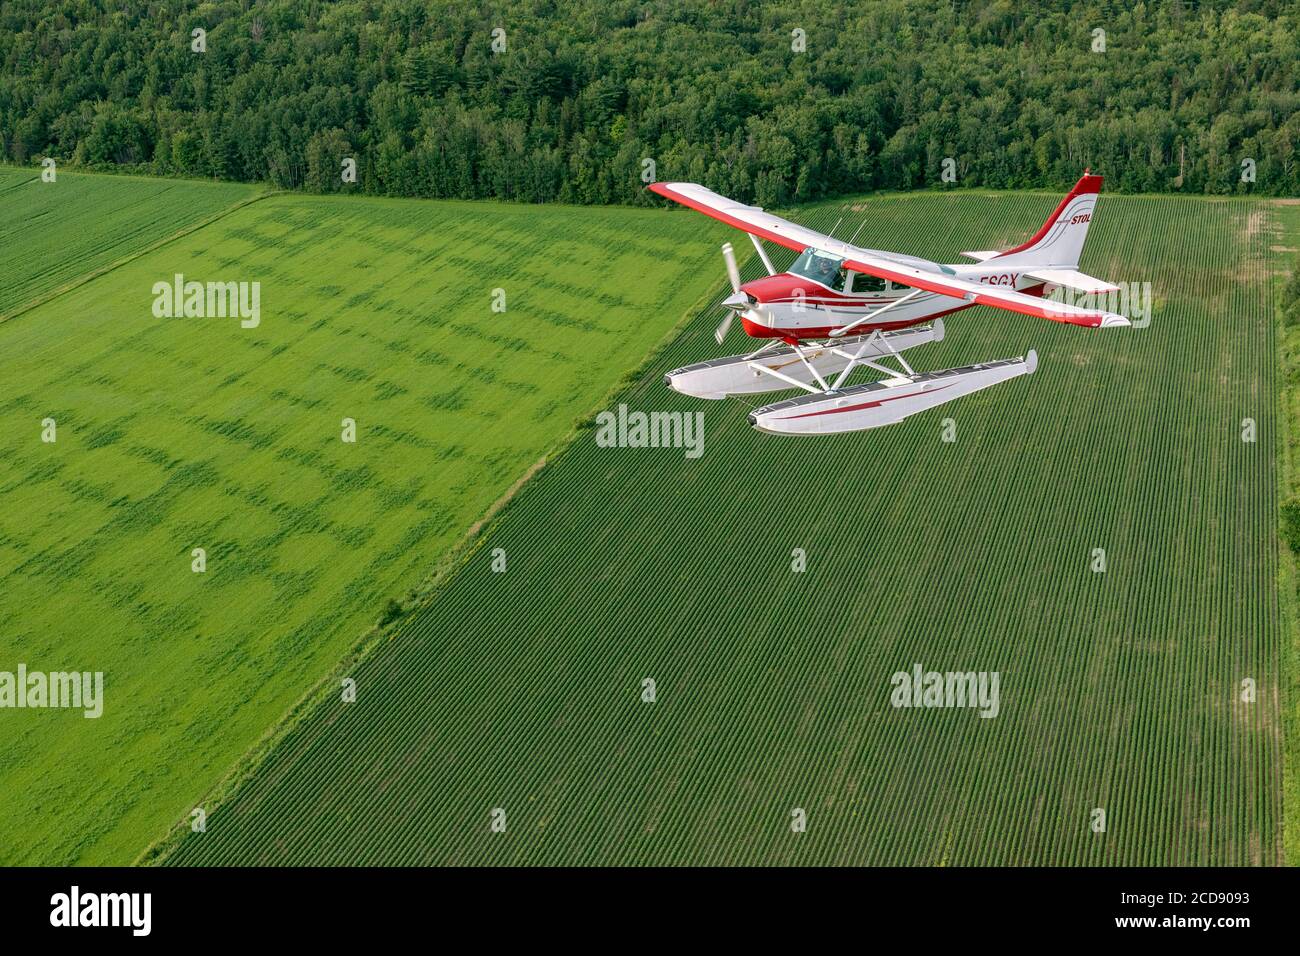 Canada, Province of Quebec, Mauricie region, Hydravion Aventure, Cessna 206 flight over a cultivated field Stock Photo